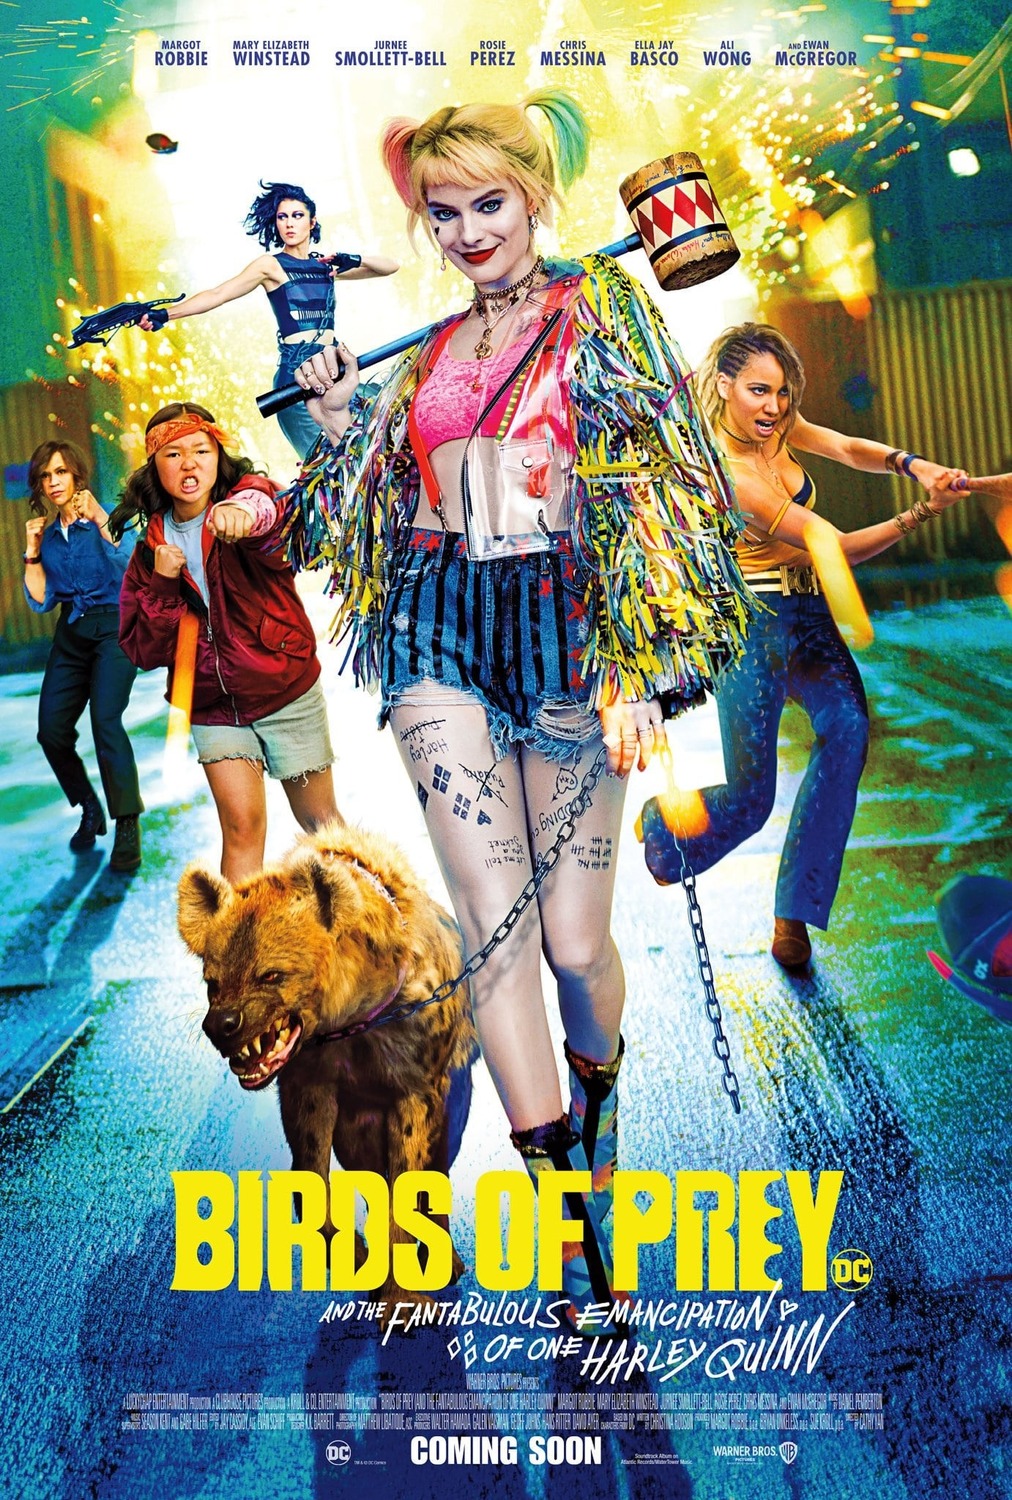 Extra Large Movie Poster Image for Birds of Prey (And the Fantabulous Emancipation of One Harley Quinn) (#15 of 18)